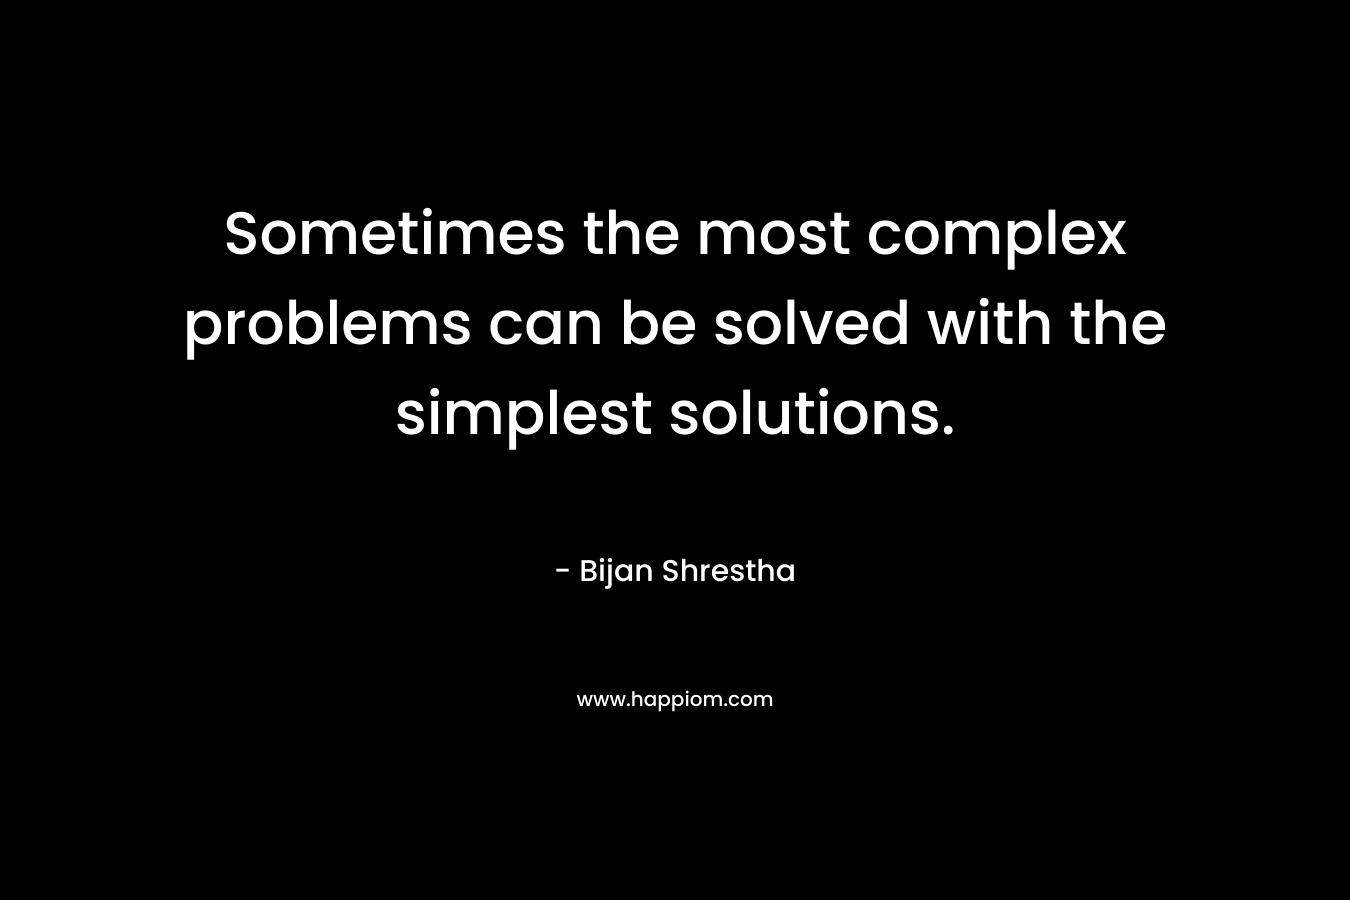 Sometimes the most complex problems can be solved with the simplest solutions.